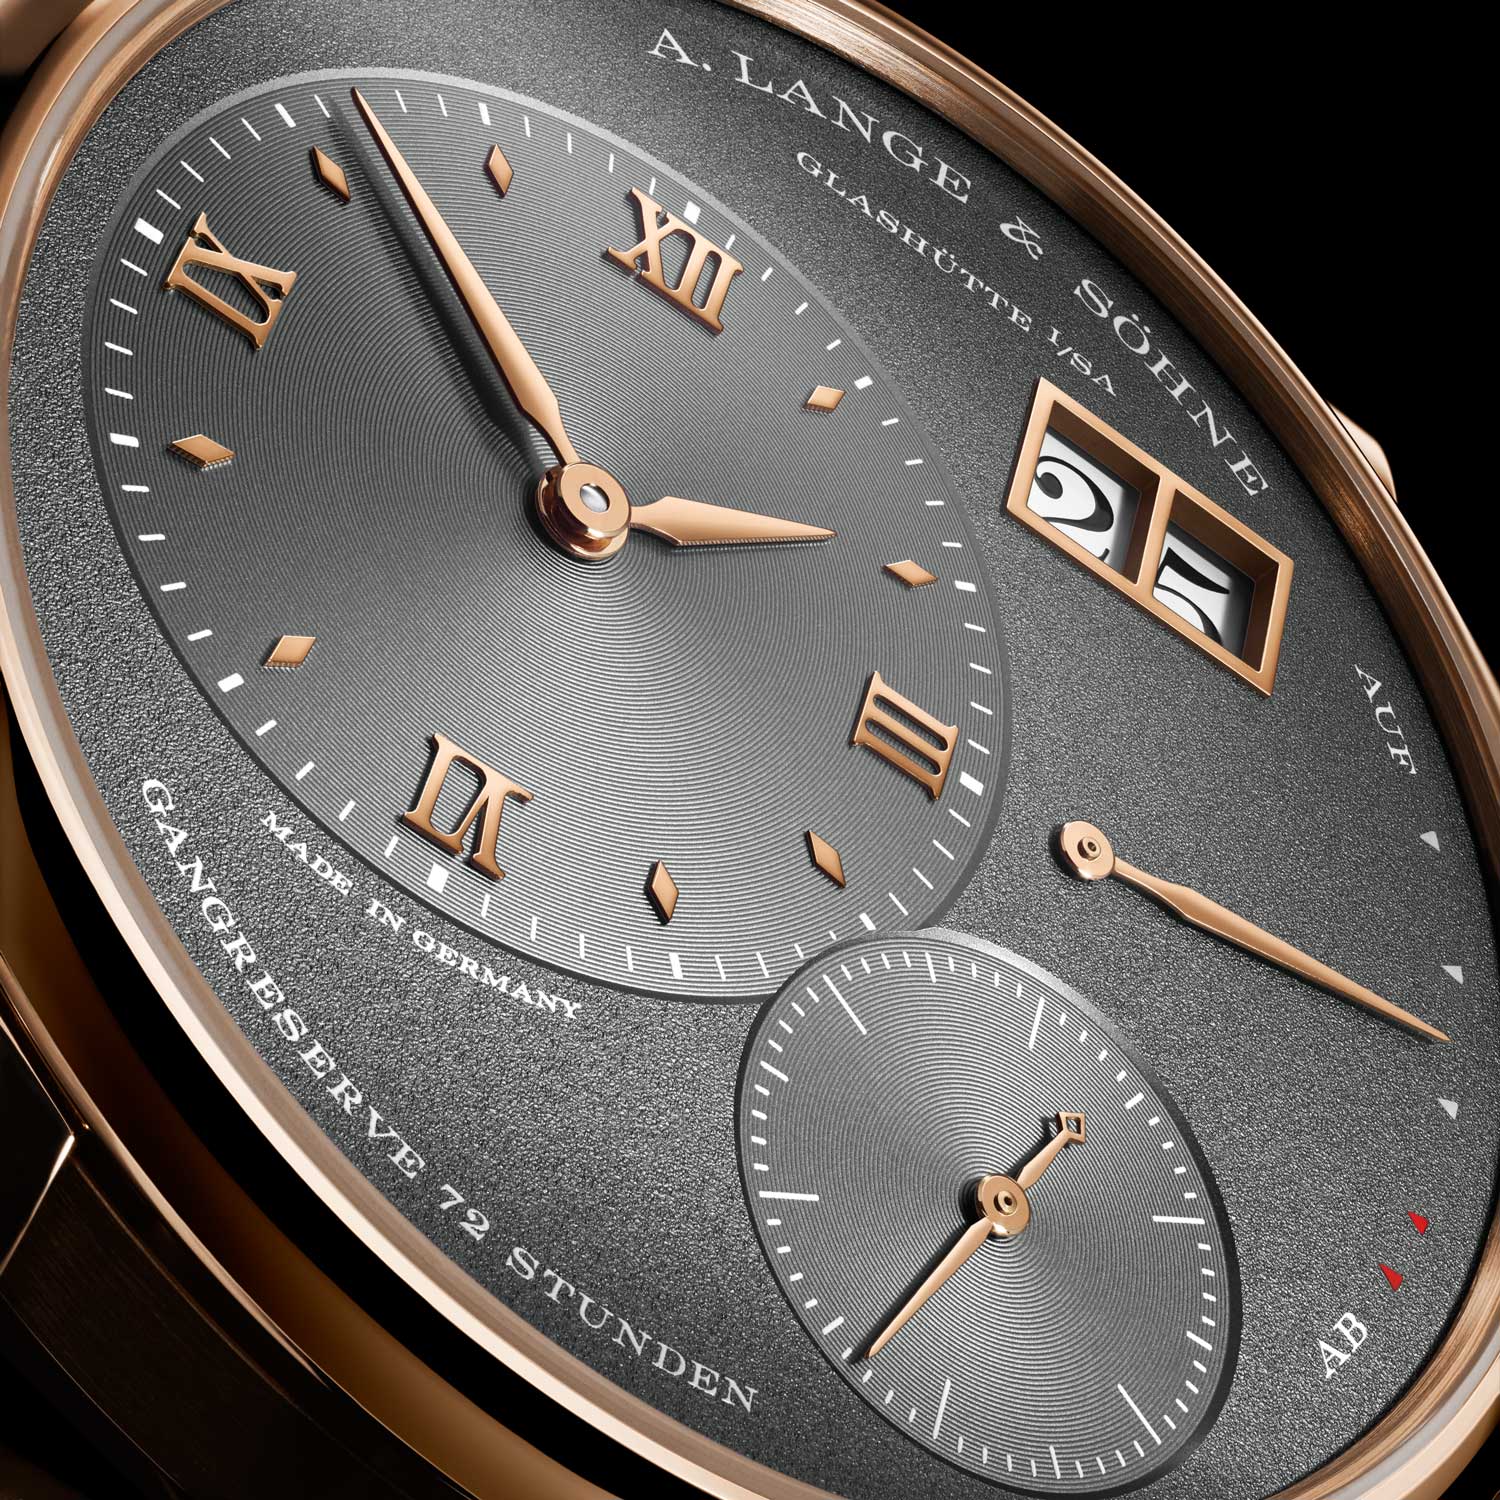 Besides a thinner case, the new Grand Lange 1 also gets a new textured grey dial